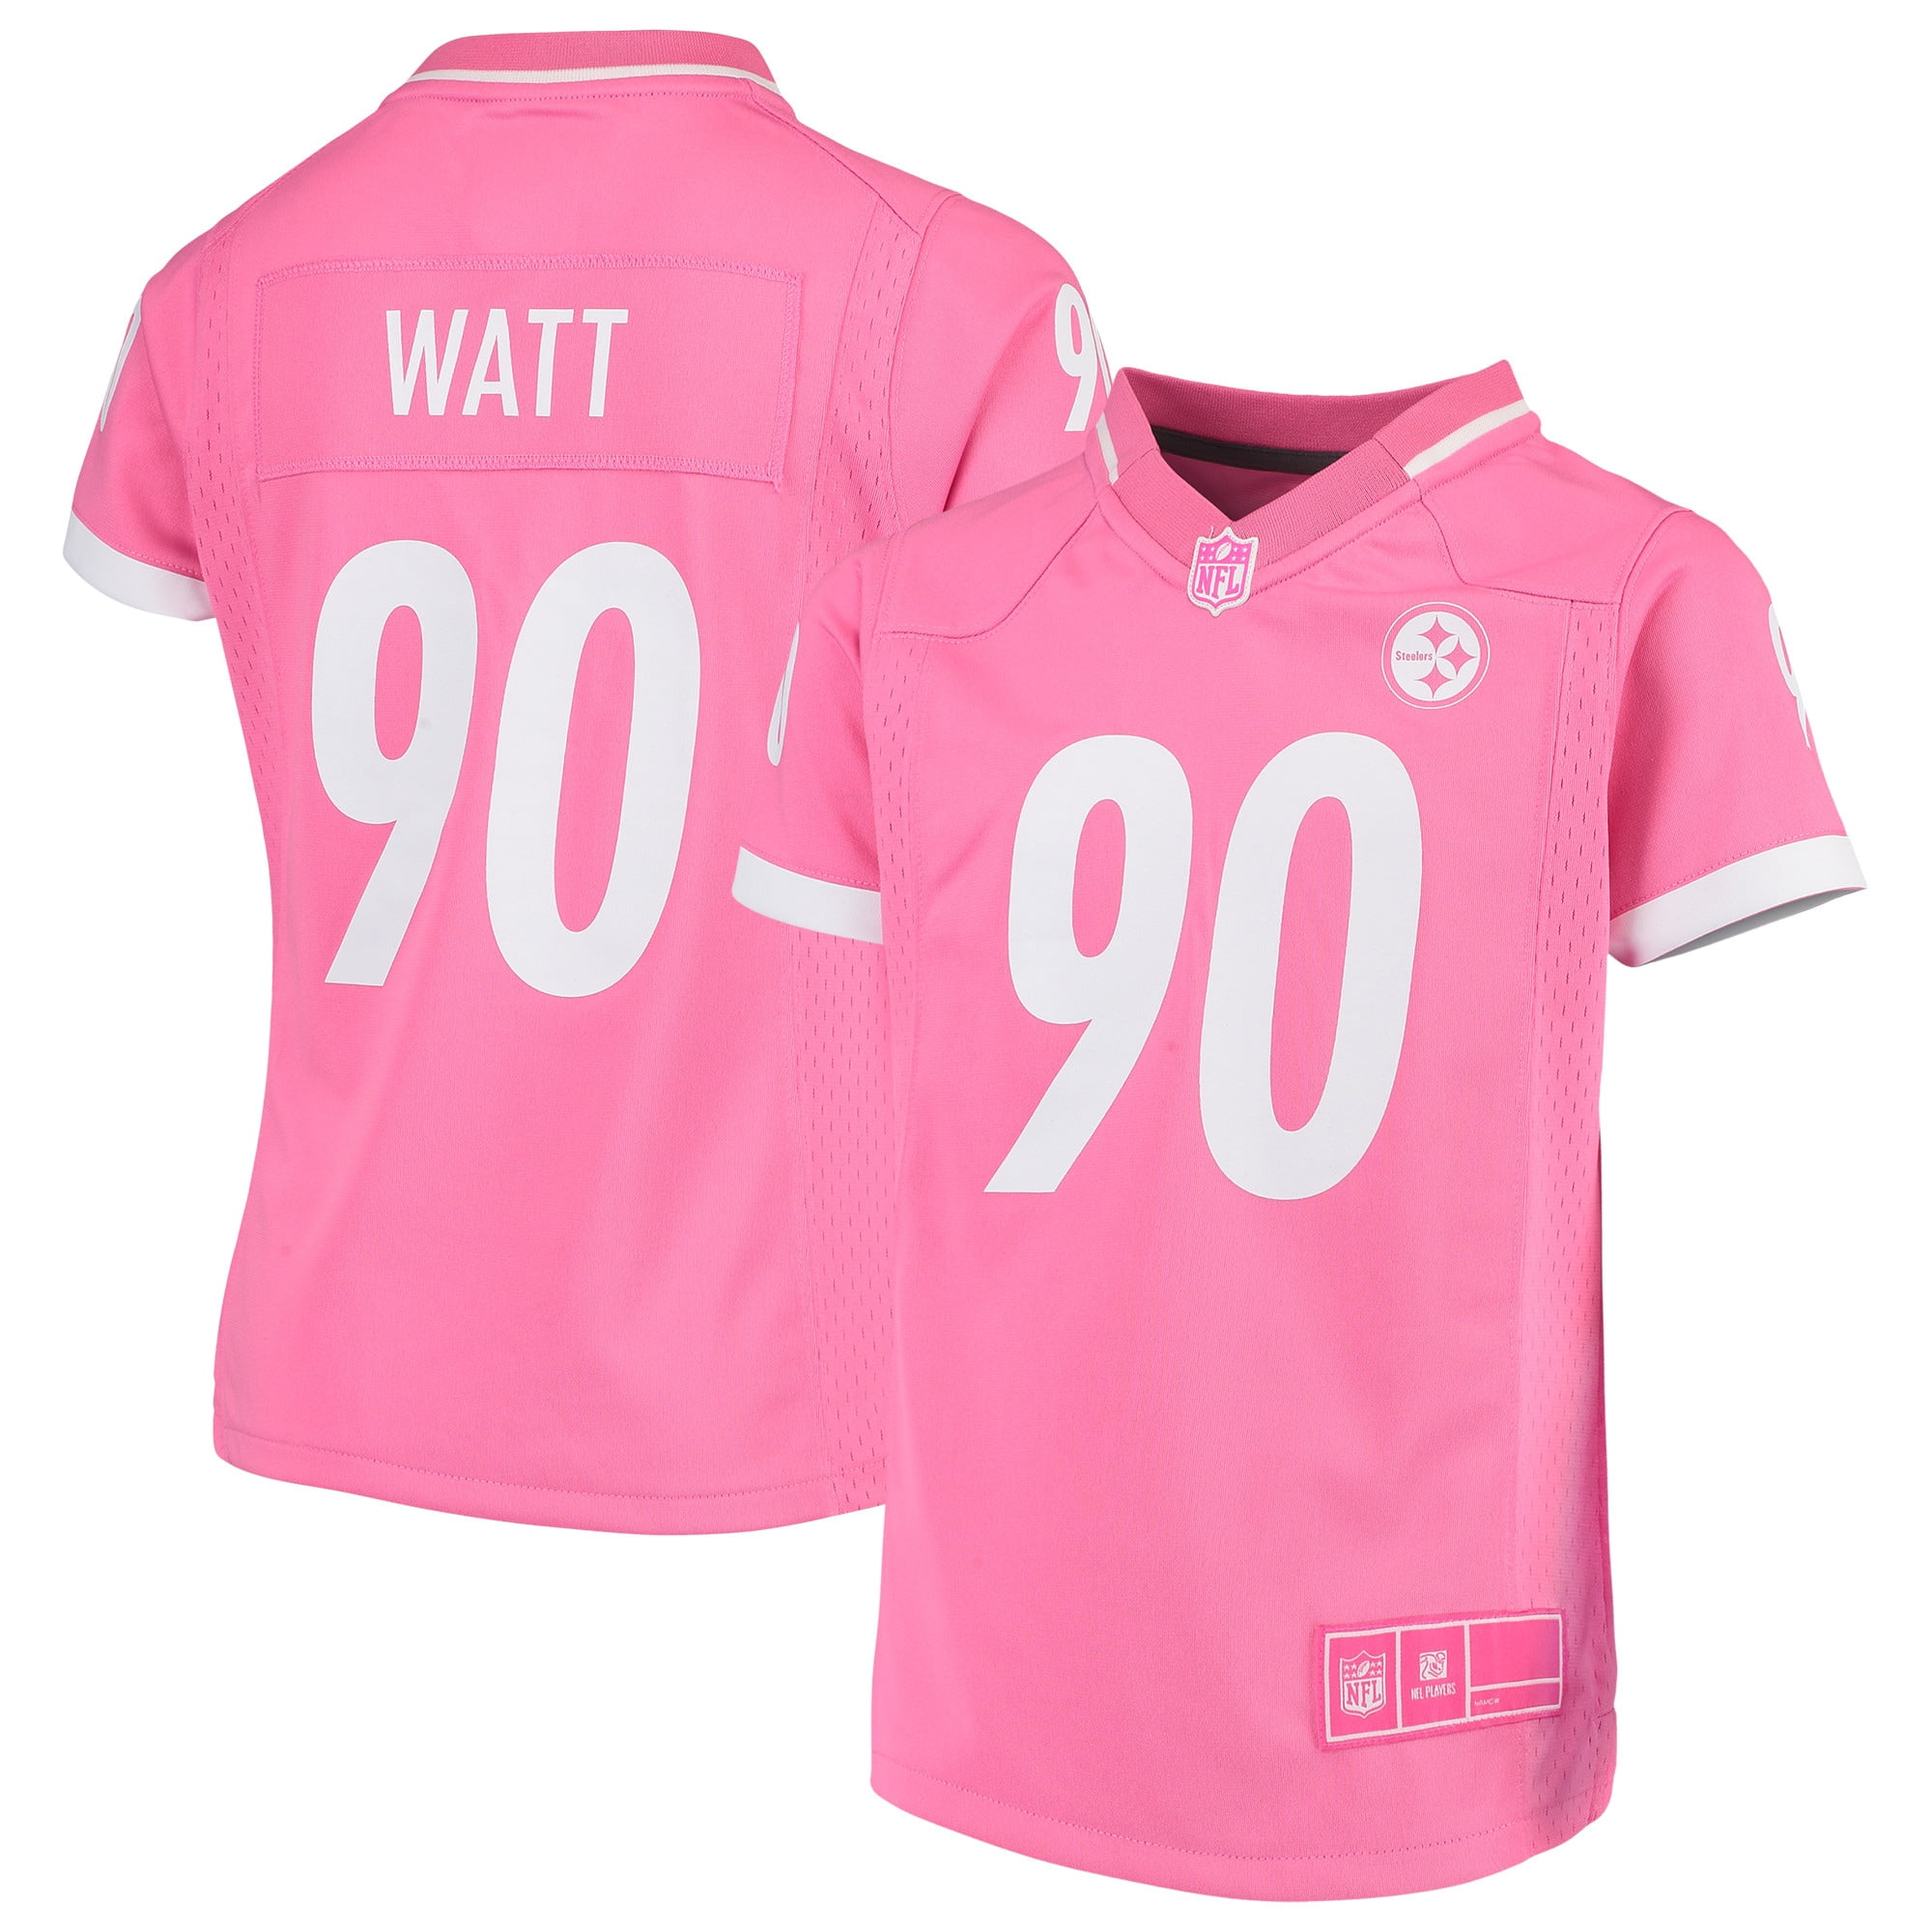 pittsburgh steelers pink toddler jersey